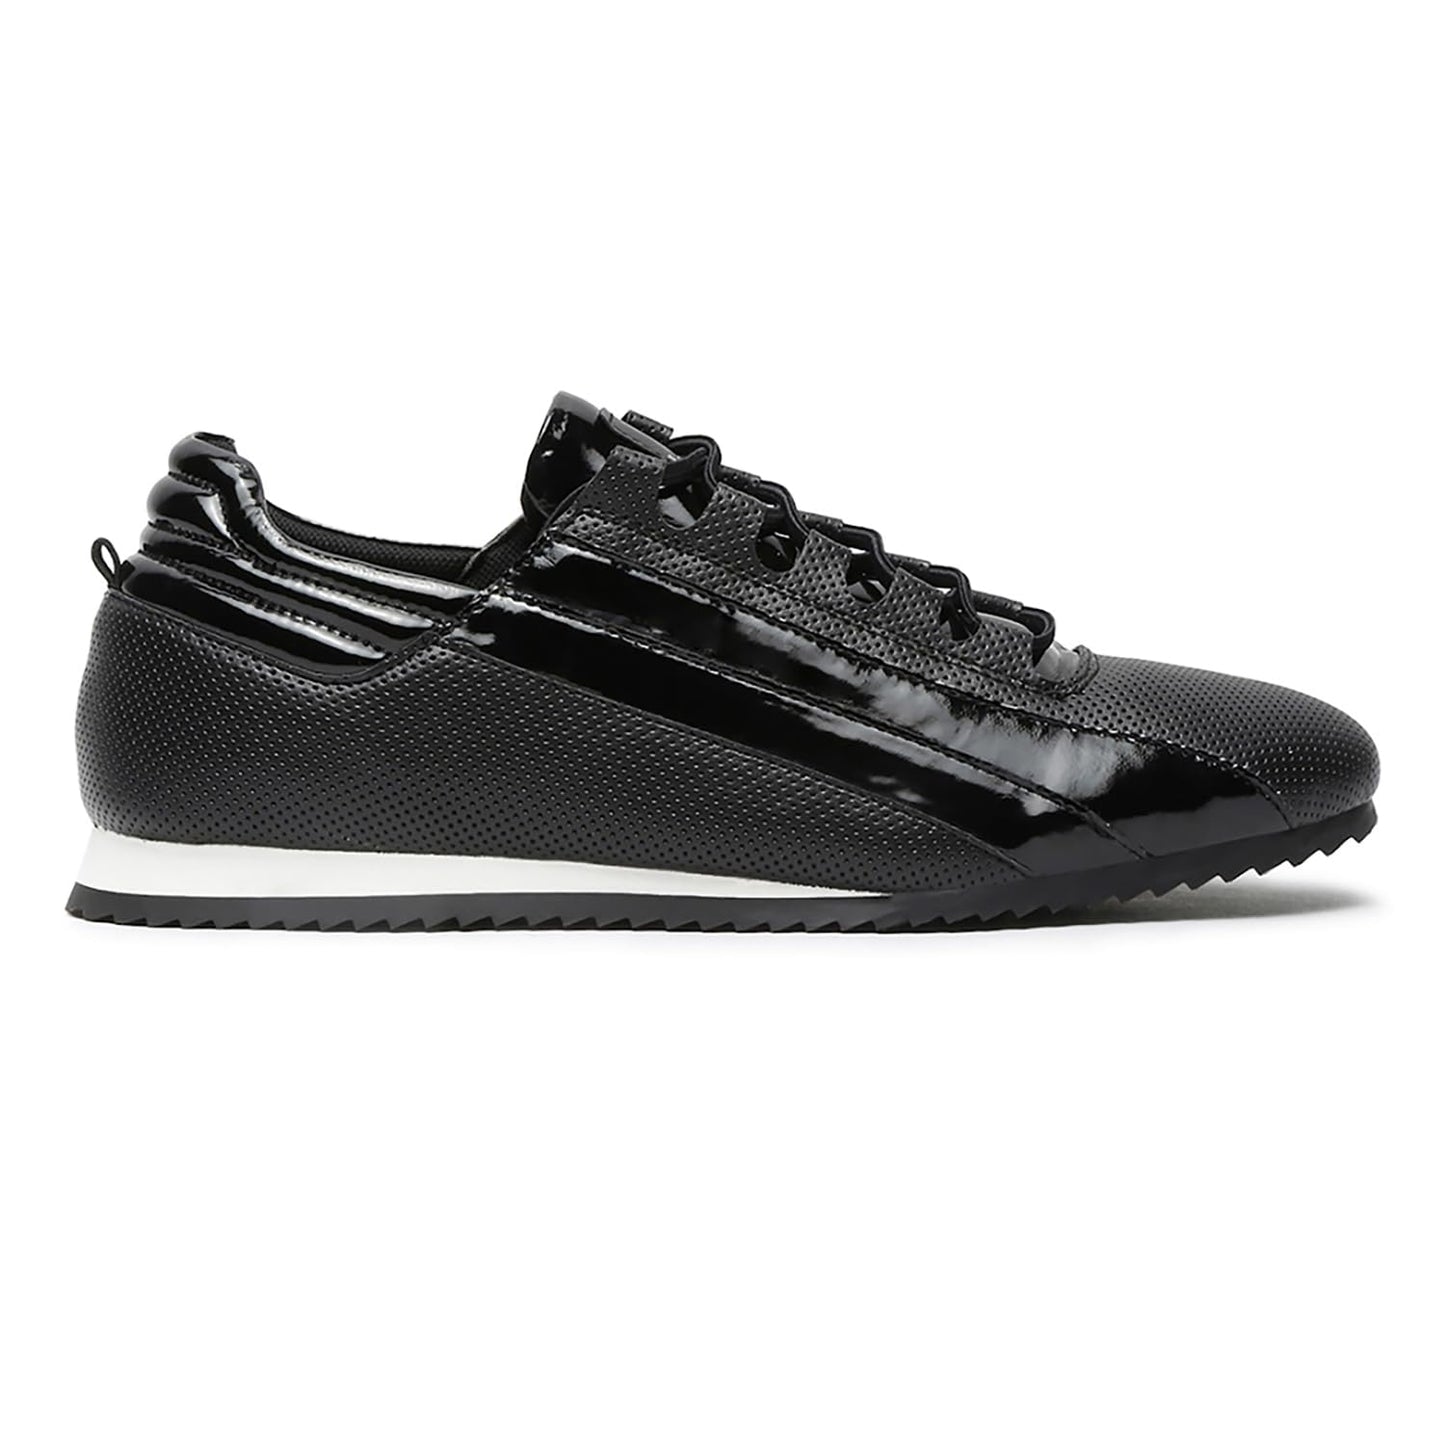 LOUIS STITCH Play Men's Egyptian Black Fashion Sneaker Comfortable for Men All Day Wear (SNK-SS) (Size- 9 UK)